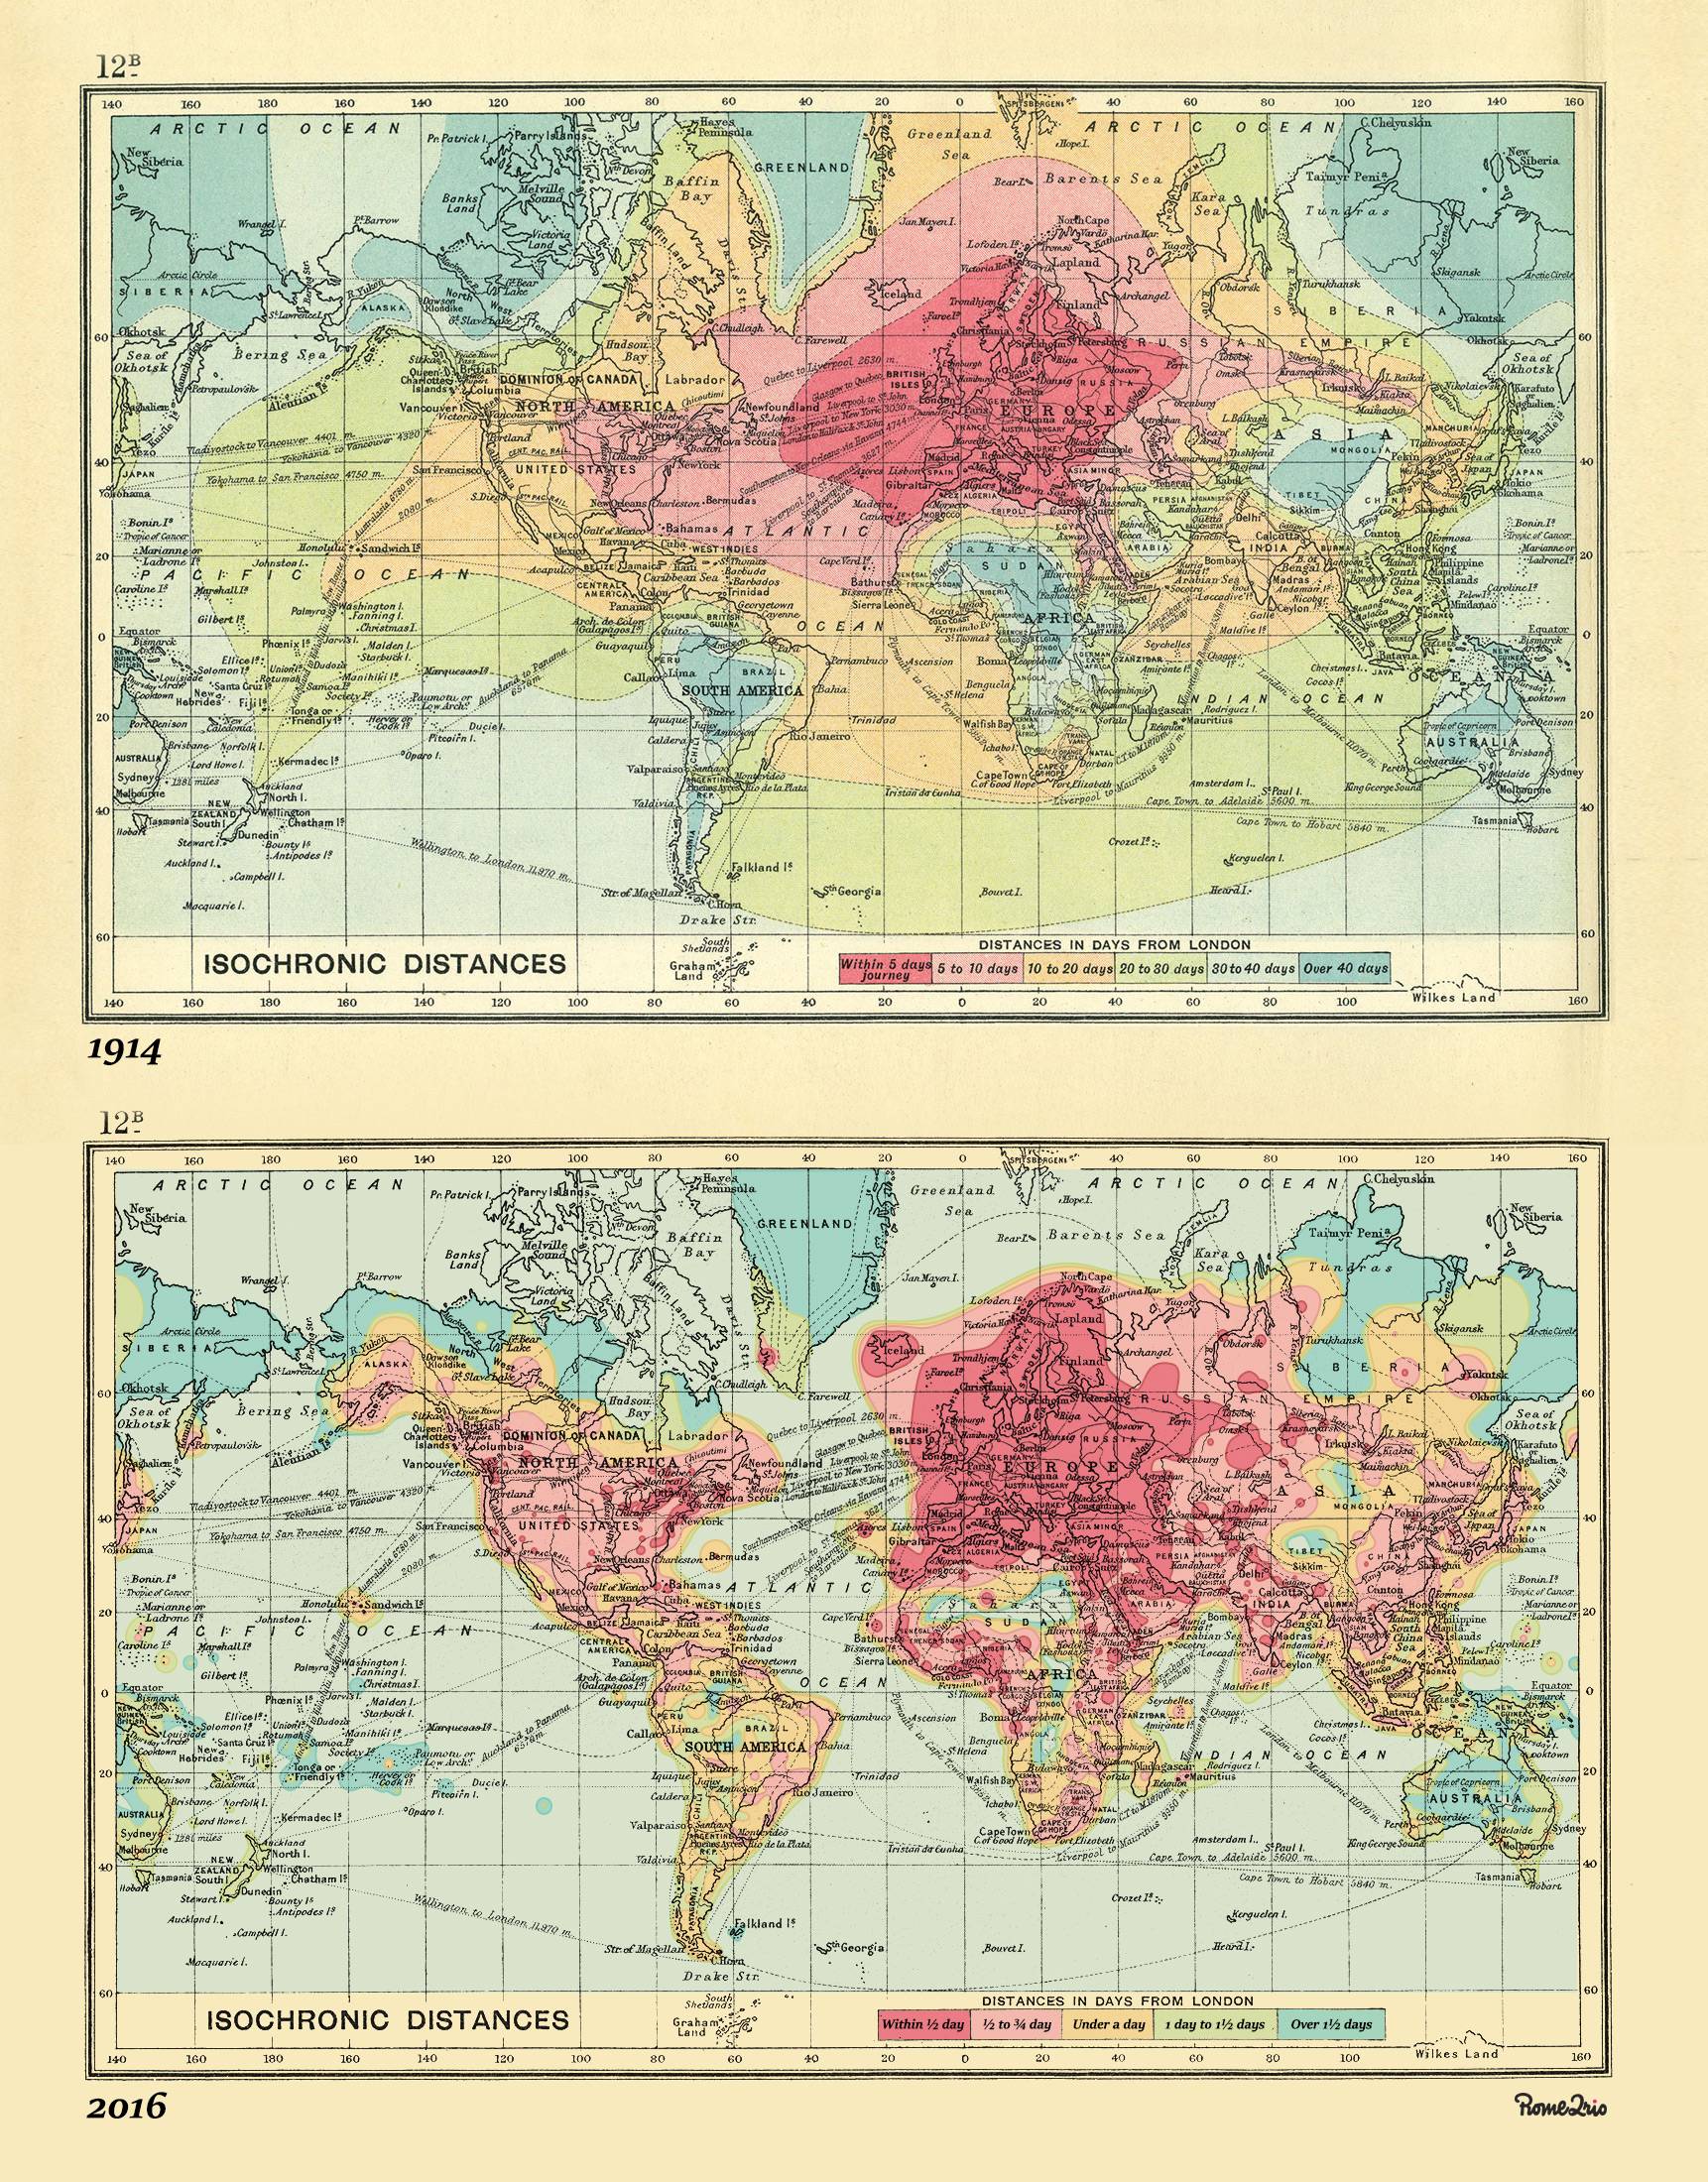 Map How Long It Took To Travel From London To The Rest Of The World In 1914 With A 16 Update Chris Blattman